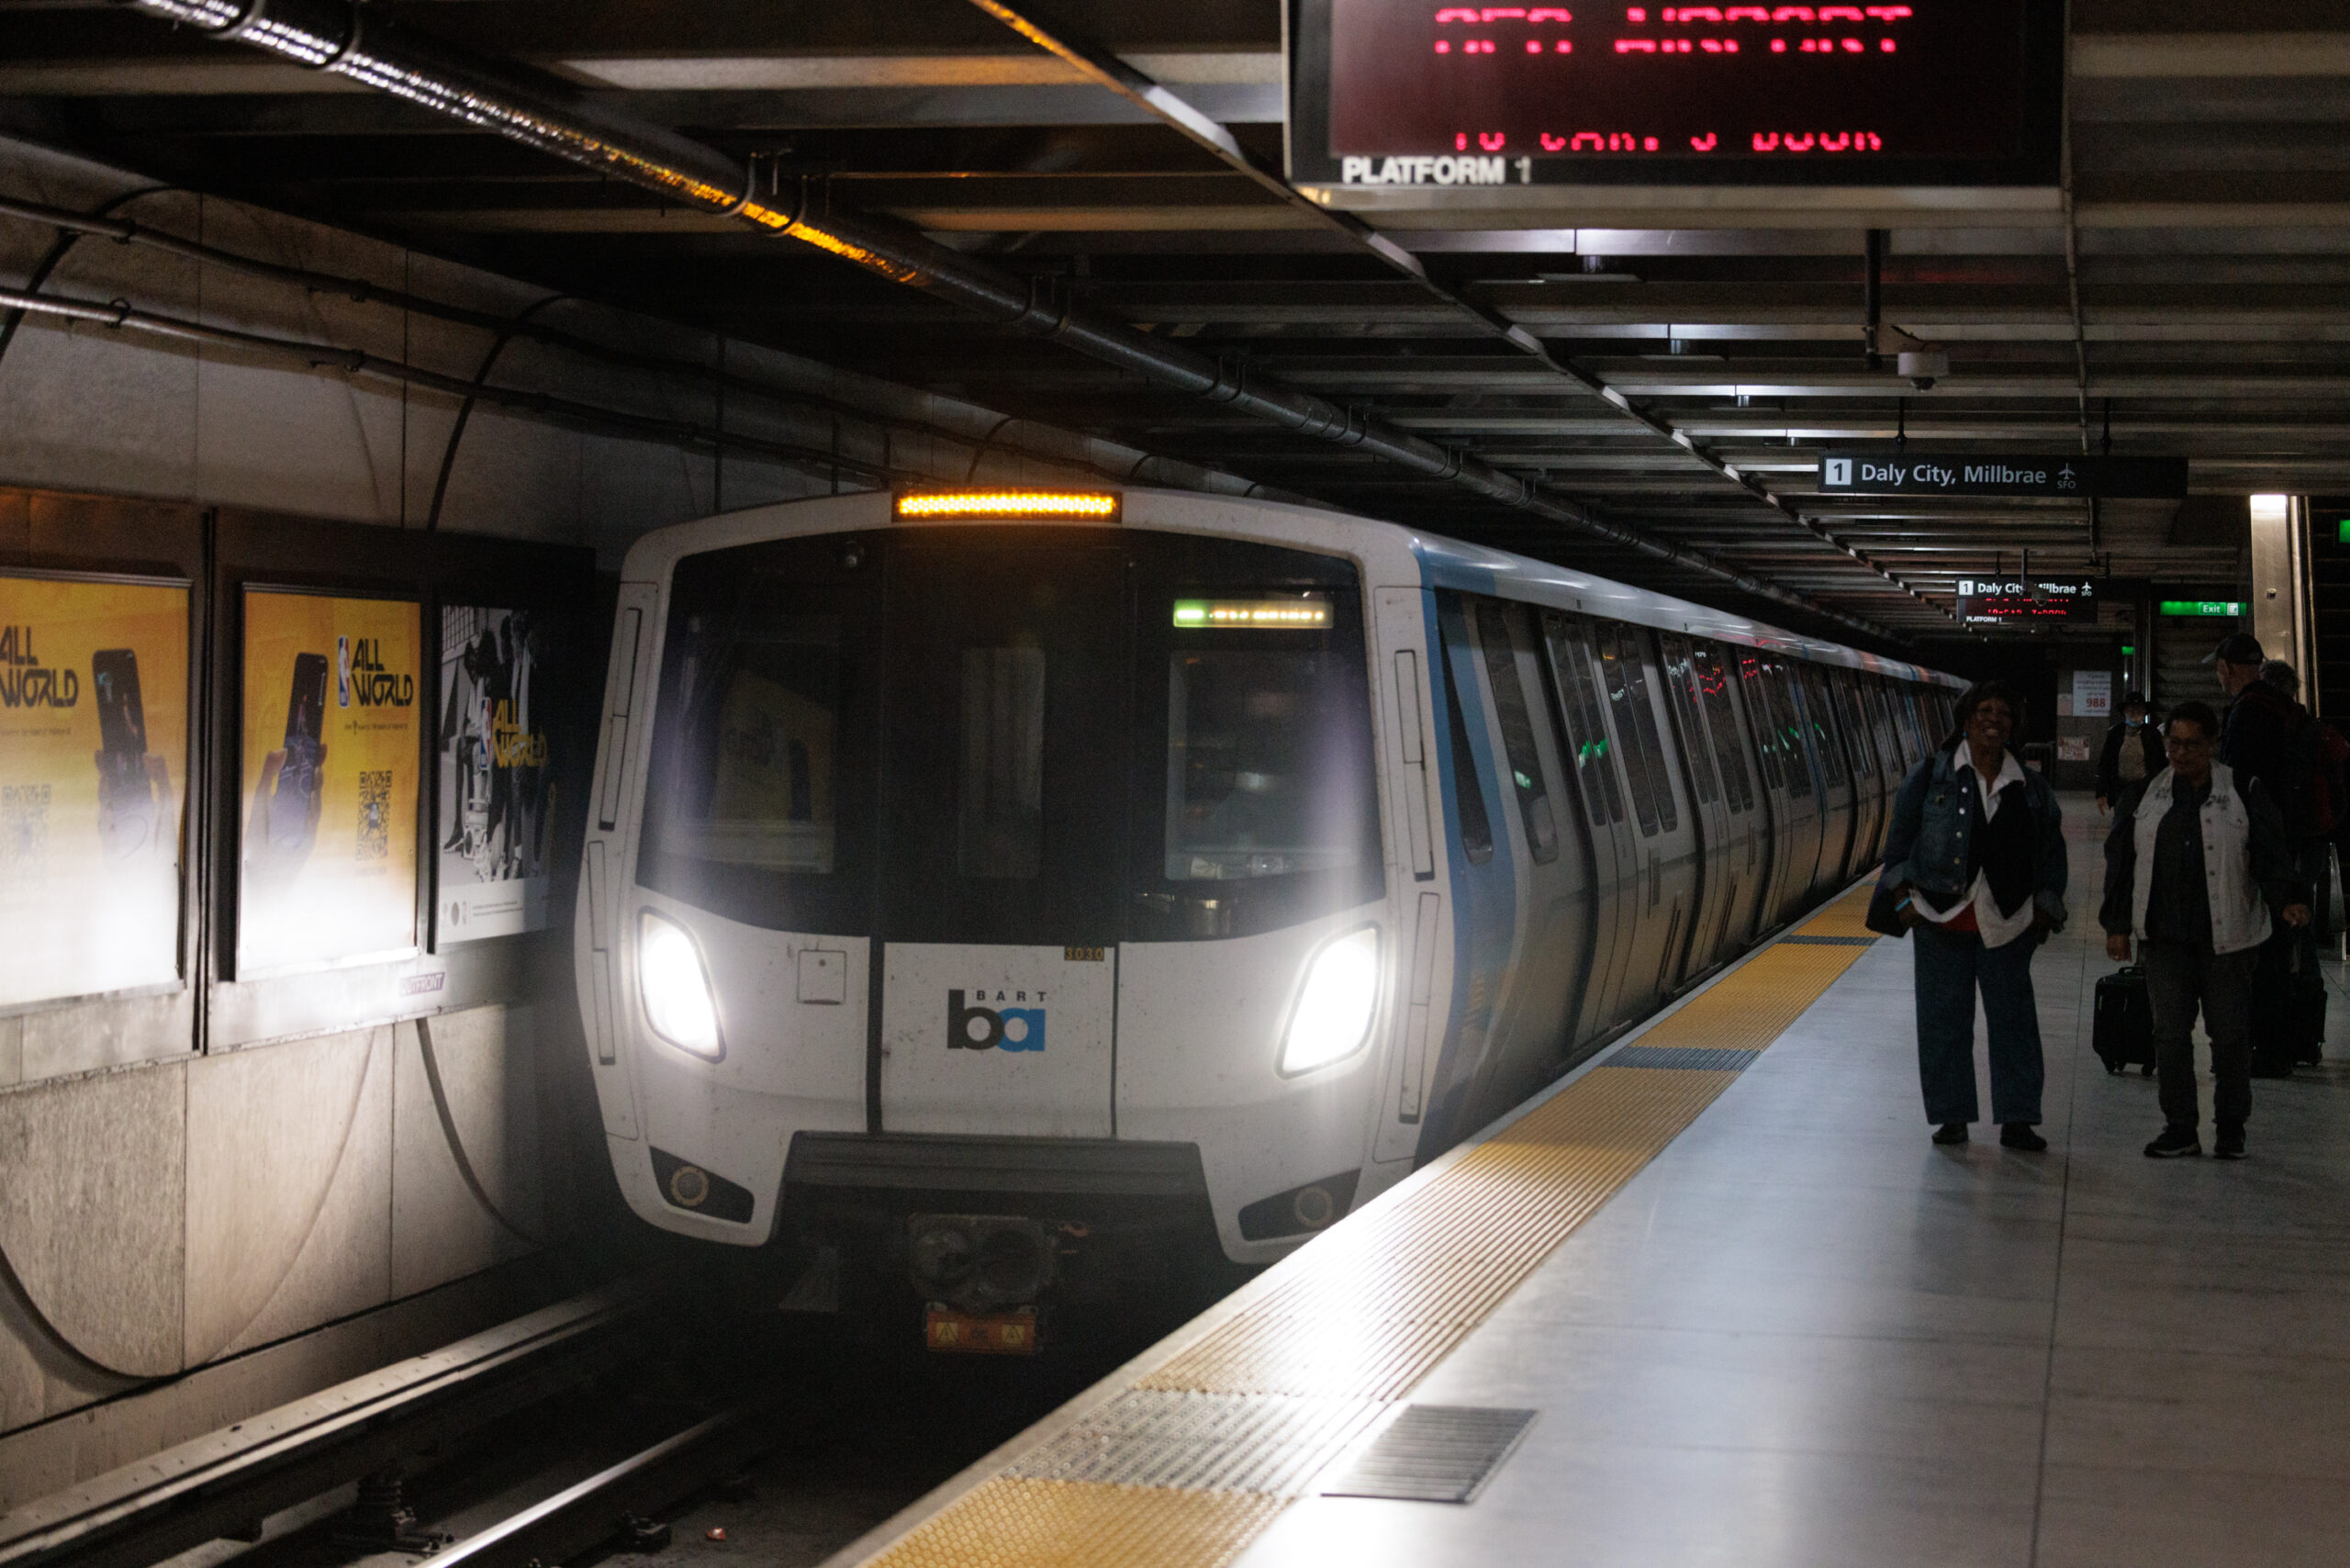 a bart train is seen in a dark tunnel at a station